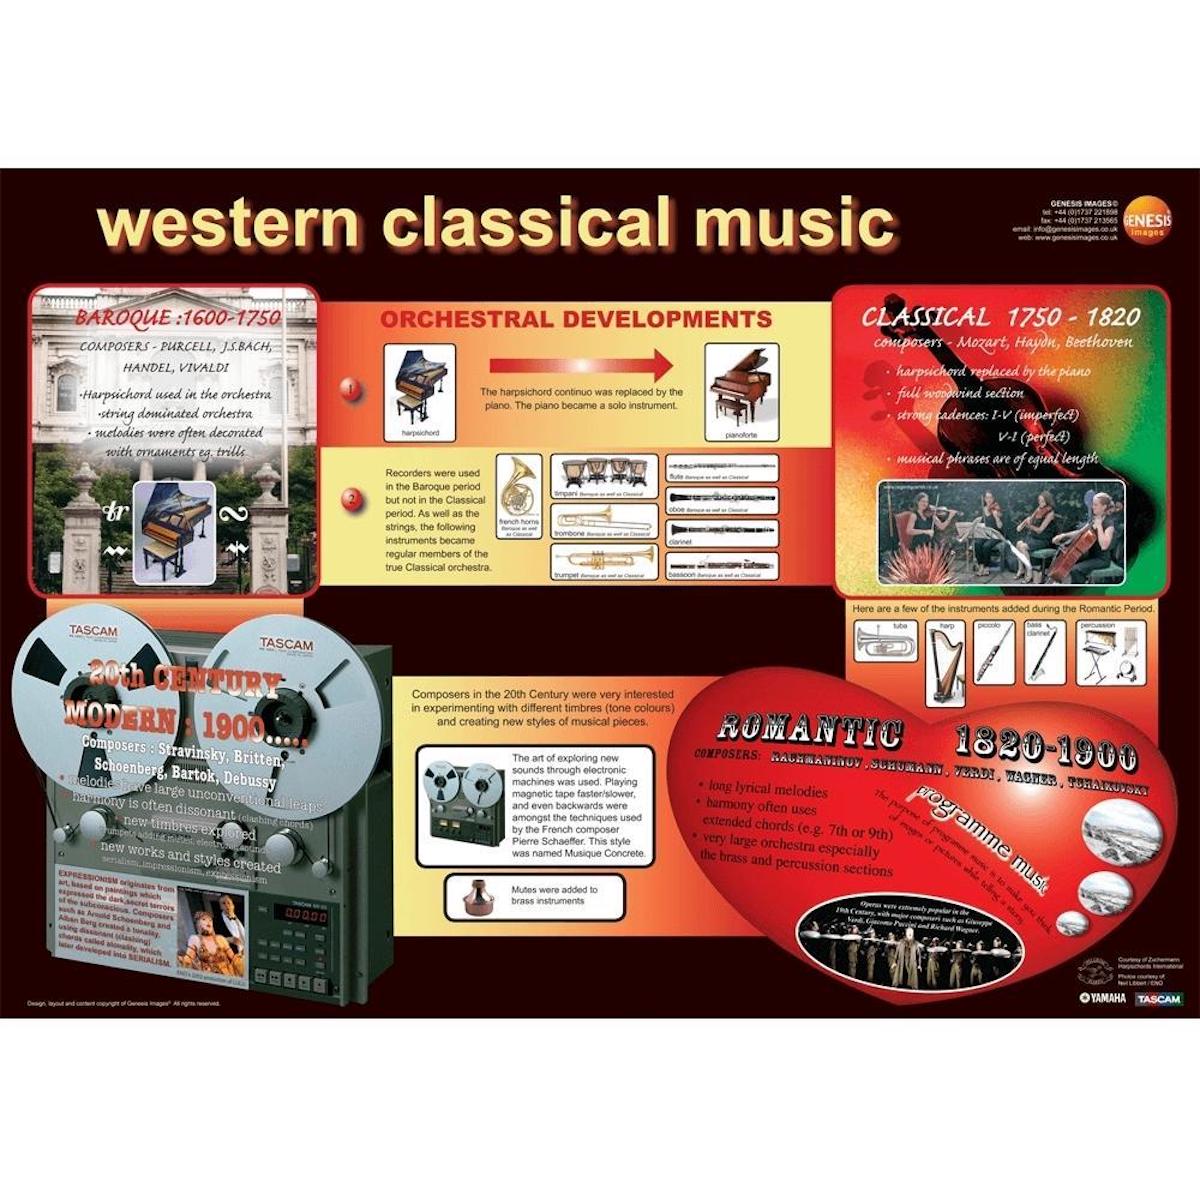 Western Classical Music - A1 wall poster